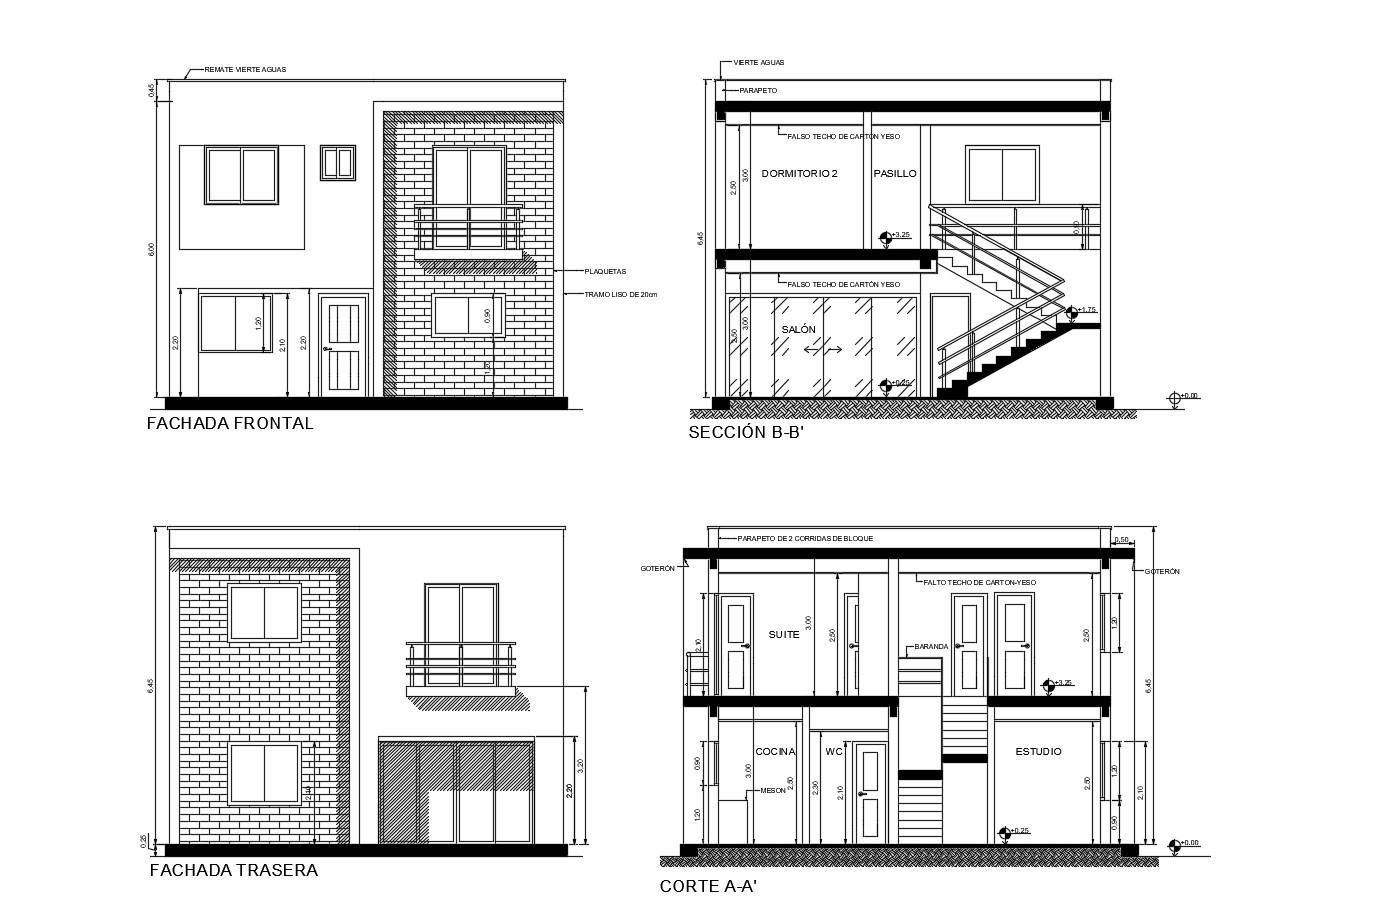 Brilliant 2 storey house with elevation and section in autocad cadbull inside house plan and elevation drawings